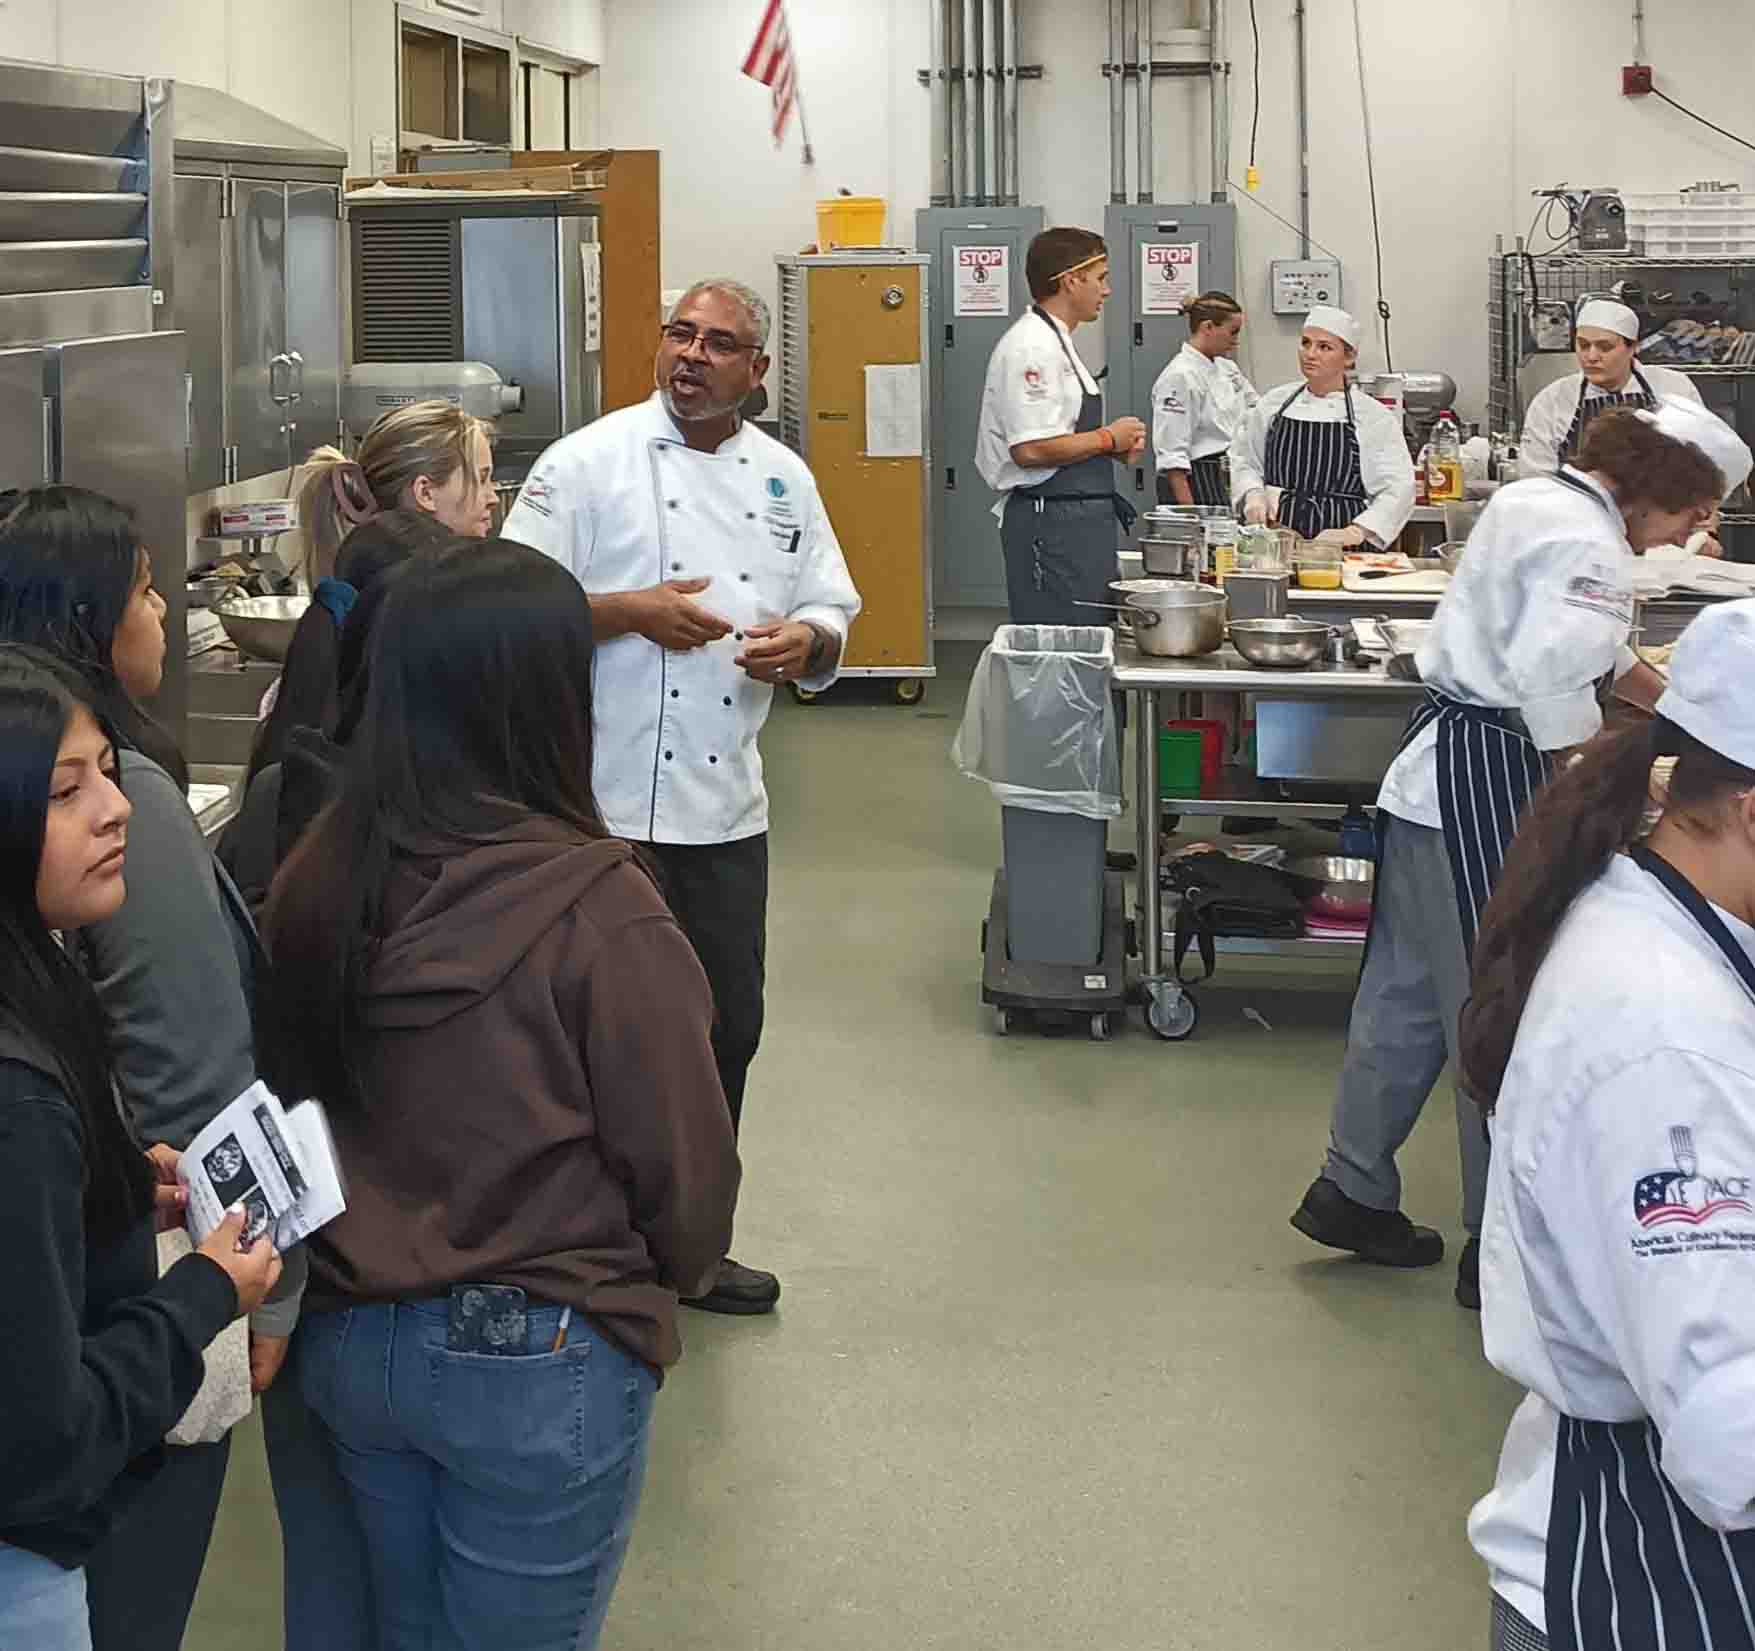 A group of people touring the lunch break kitchen